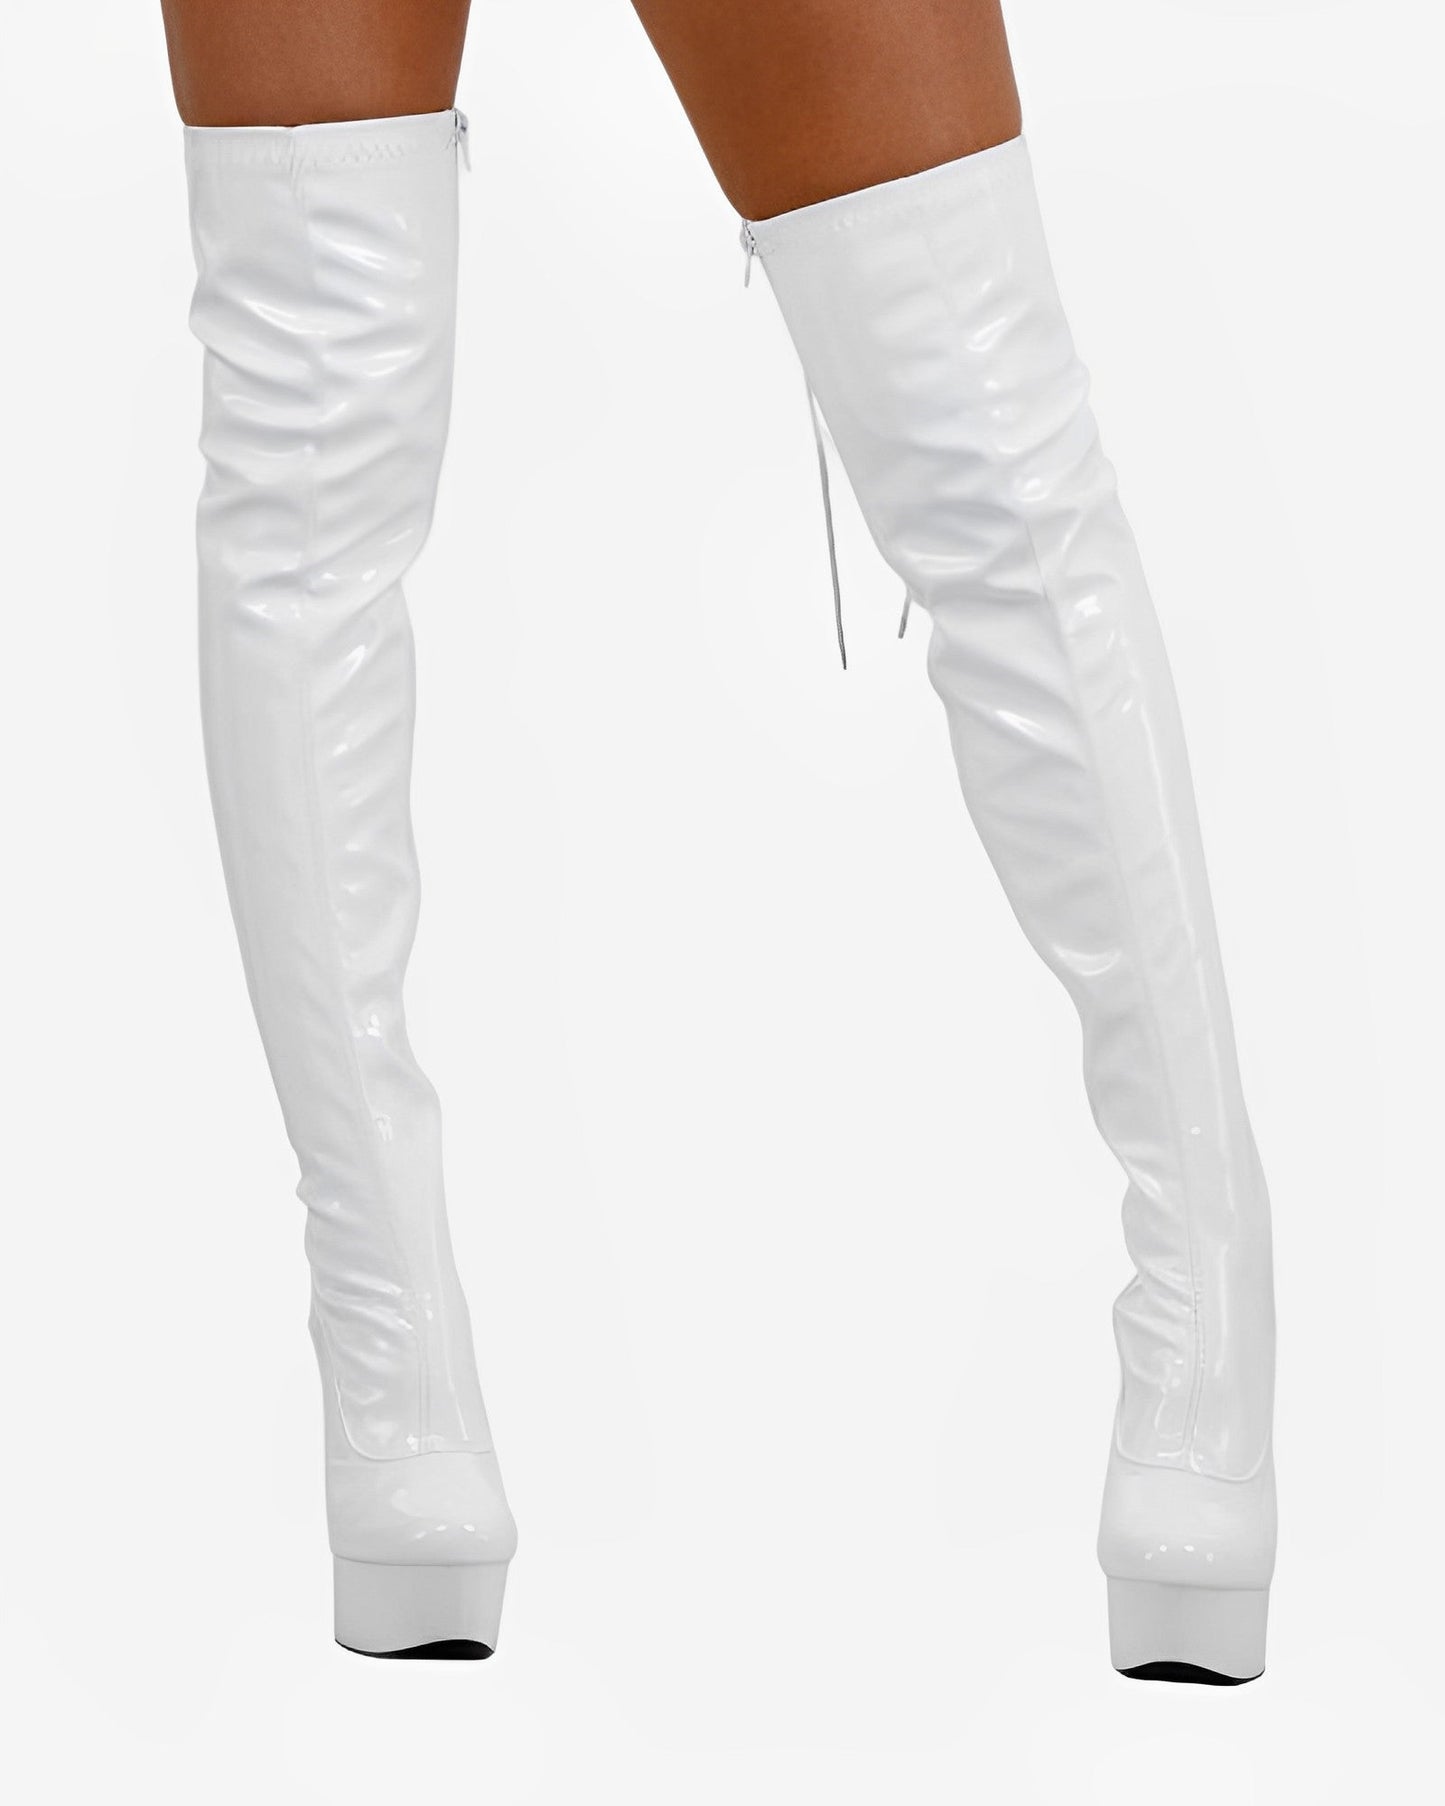 Shoes White PVC Domina Over The Knee High heels Boots